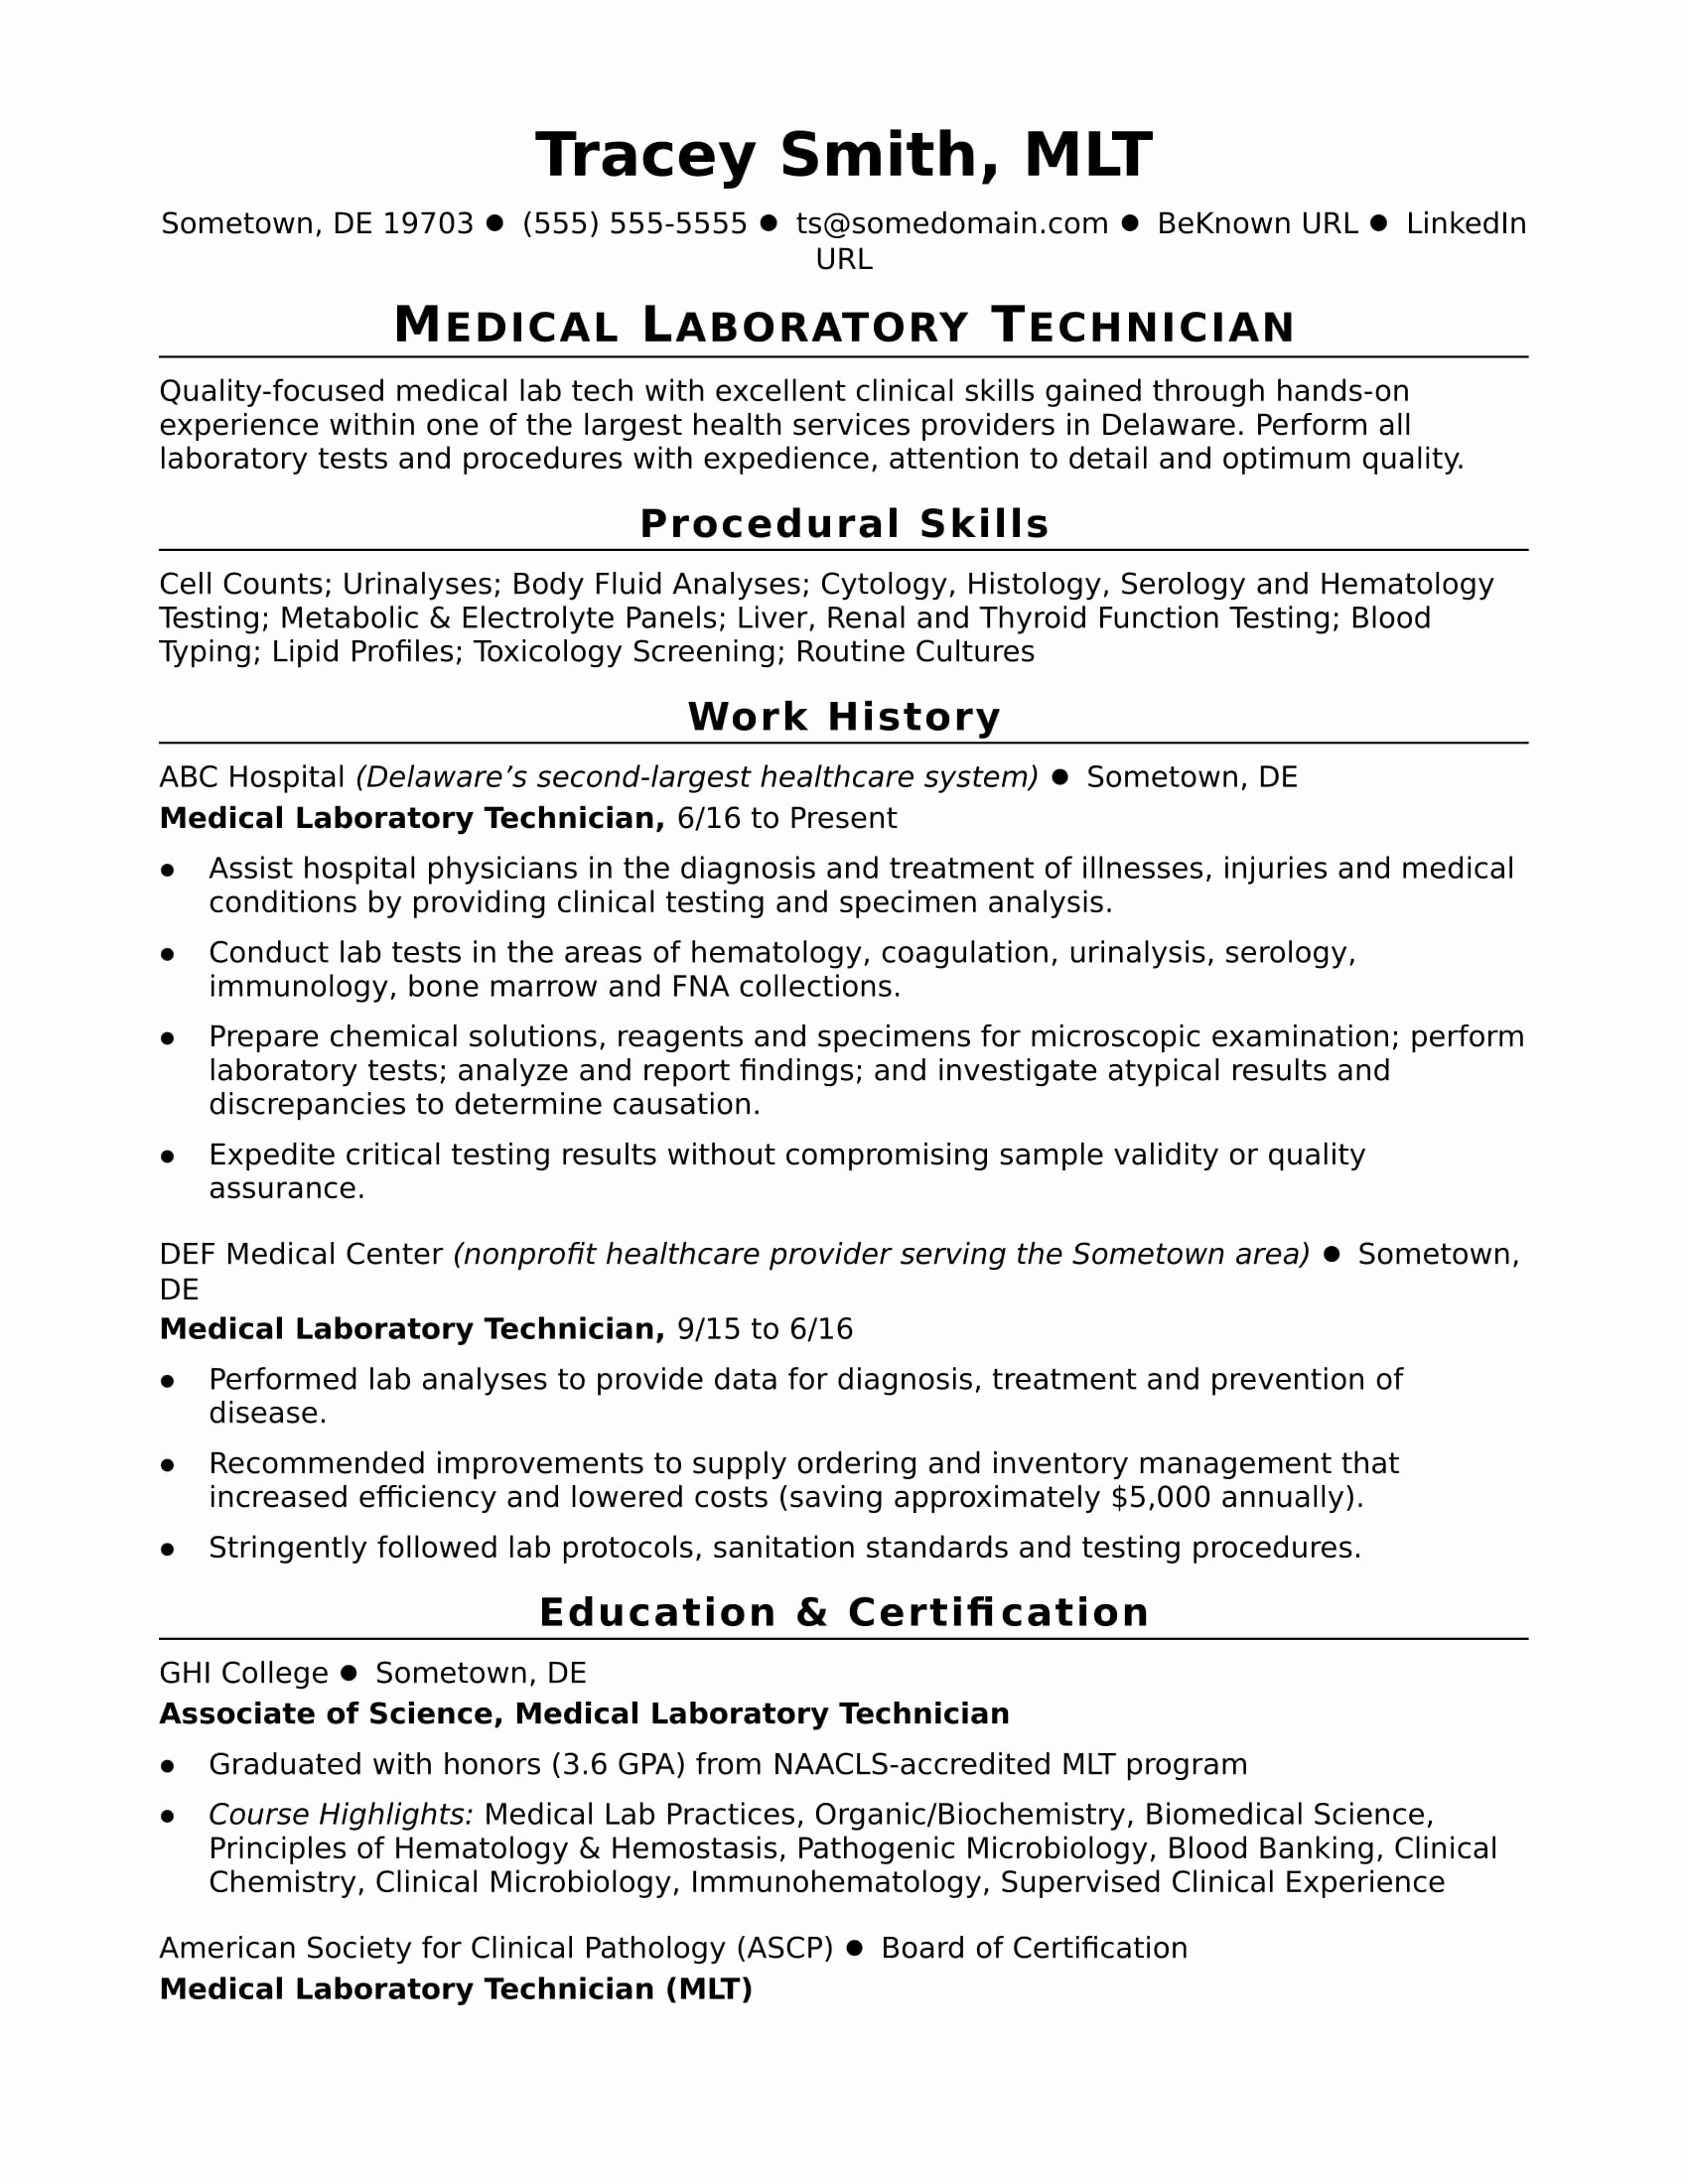 Resume for Lab Technician Inspirational Entry Level Lab Technician Resume Sample